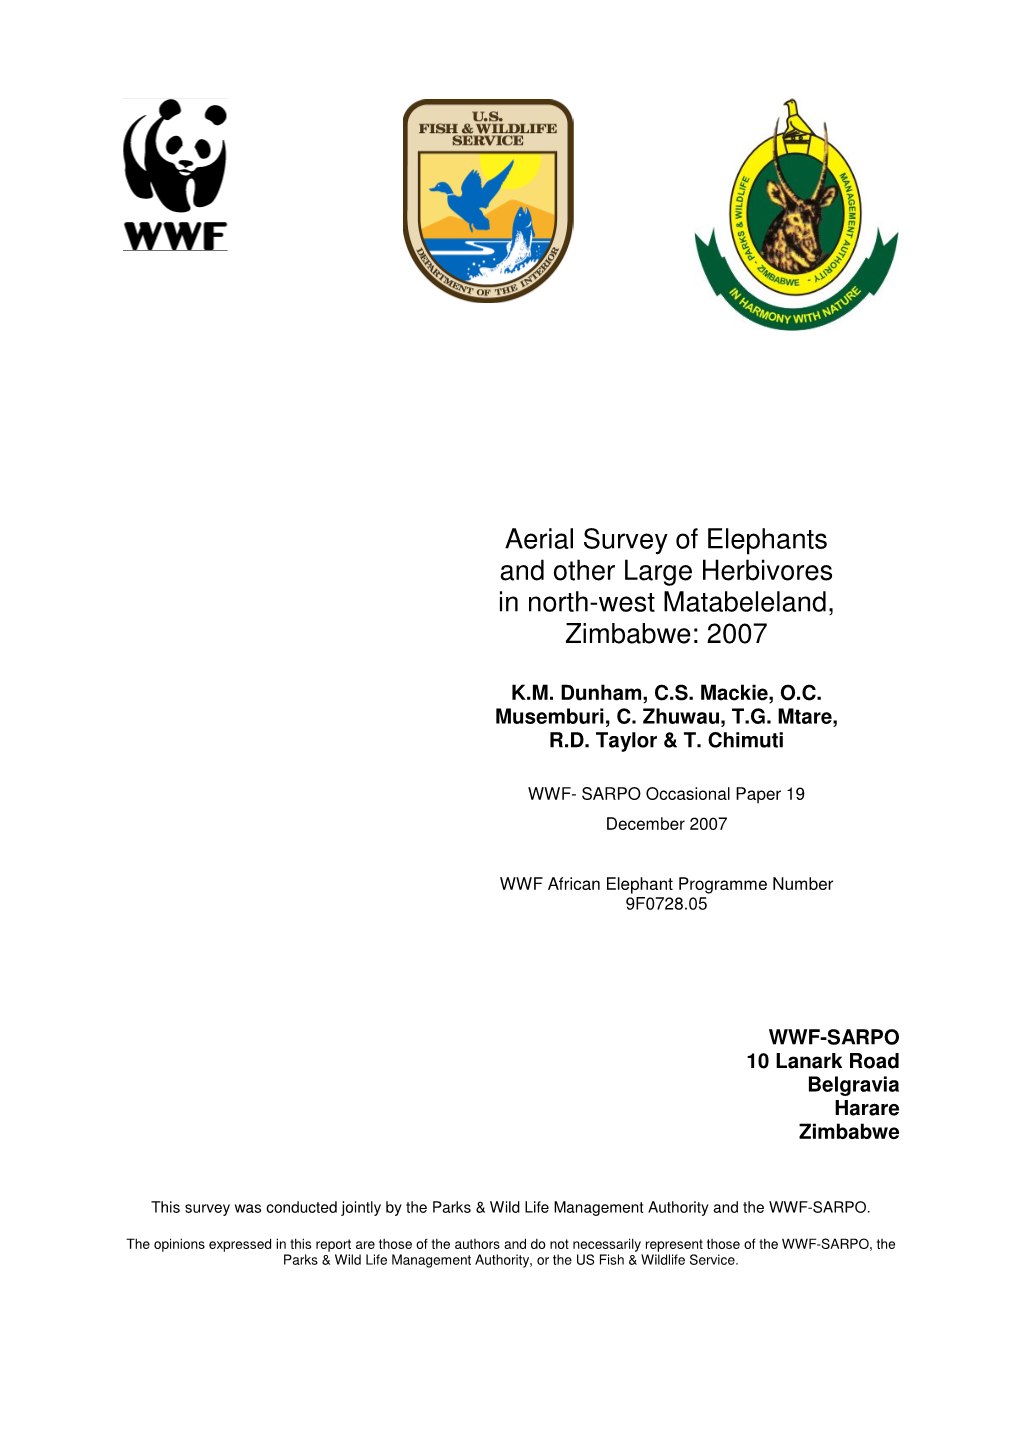 Aerial Survey of Elephants and Other Large Herbivores in North-West Matabeleland, Zimbabwe: 2007